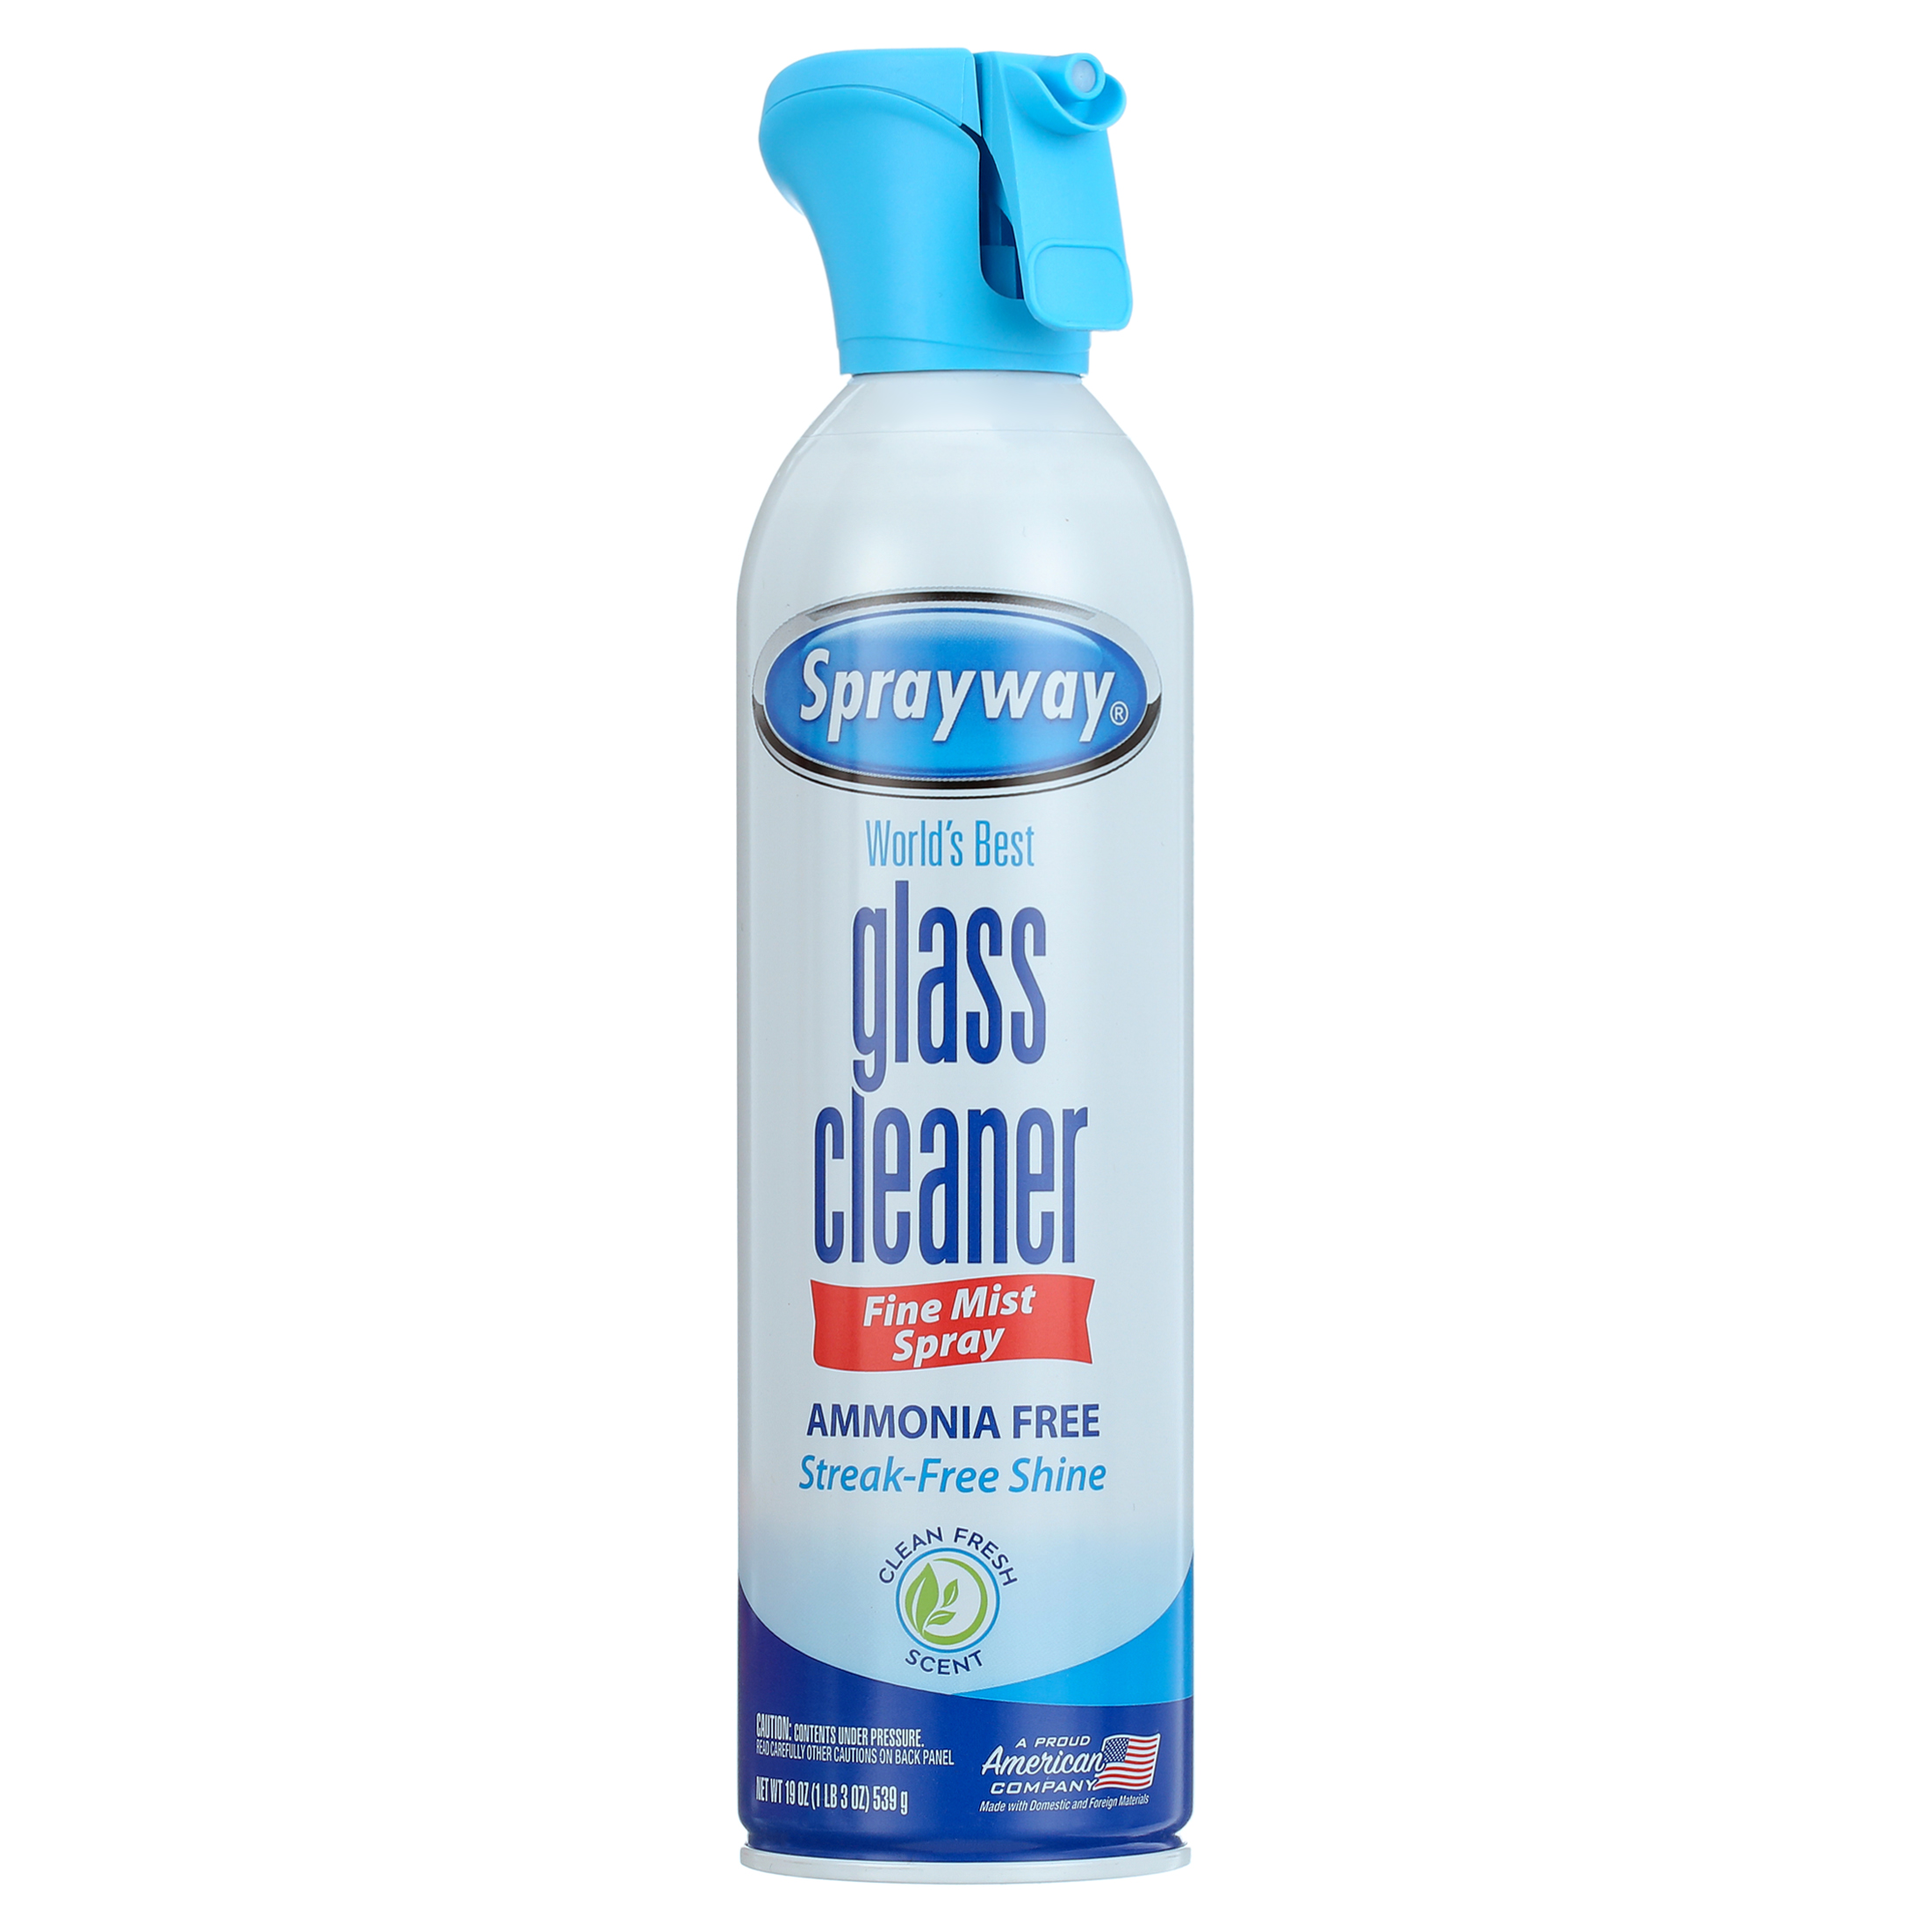 Sprayway Fresh Scent Glass Cleaner, 19 oz - image 1 of 7